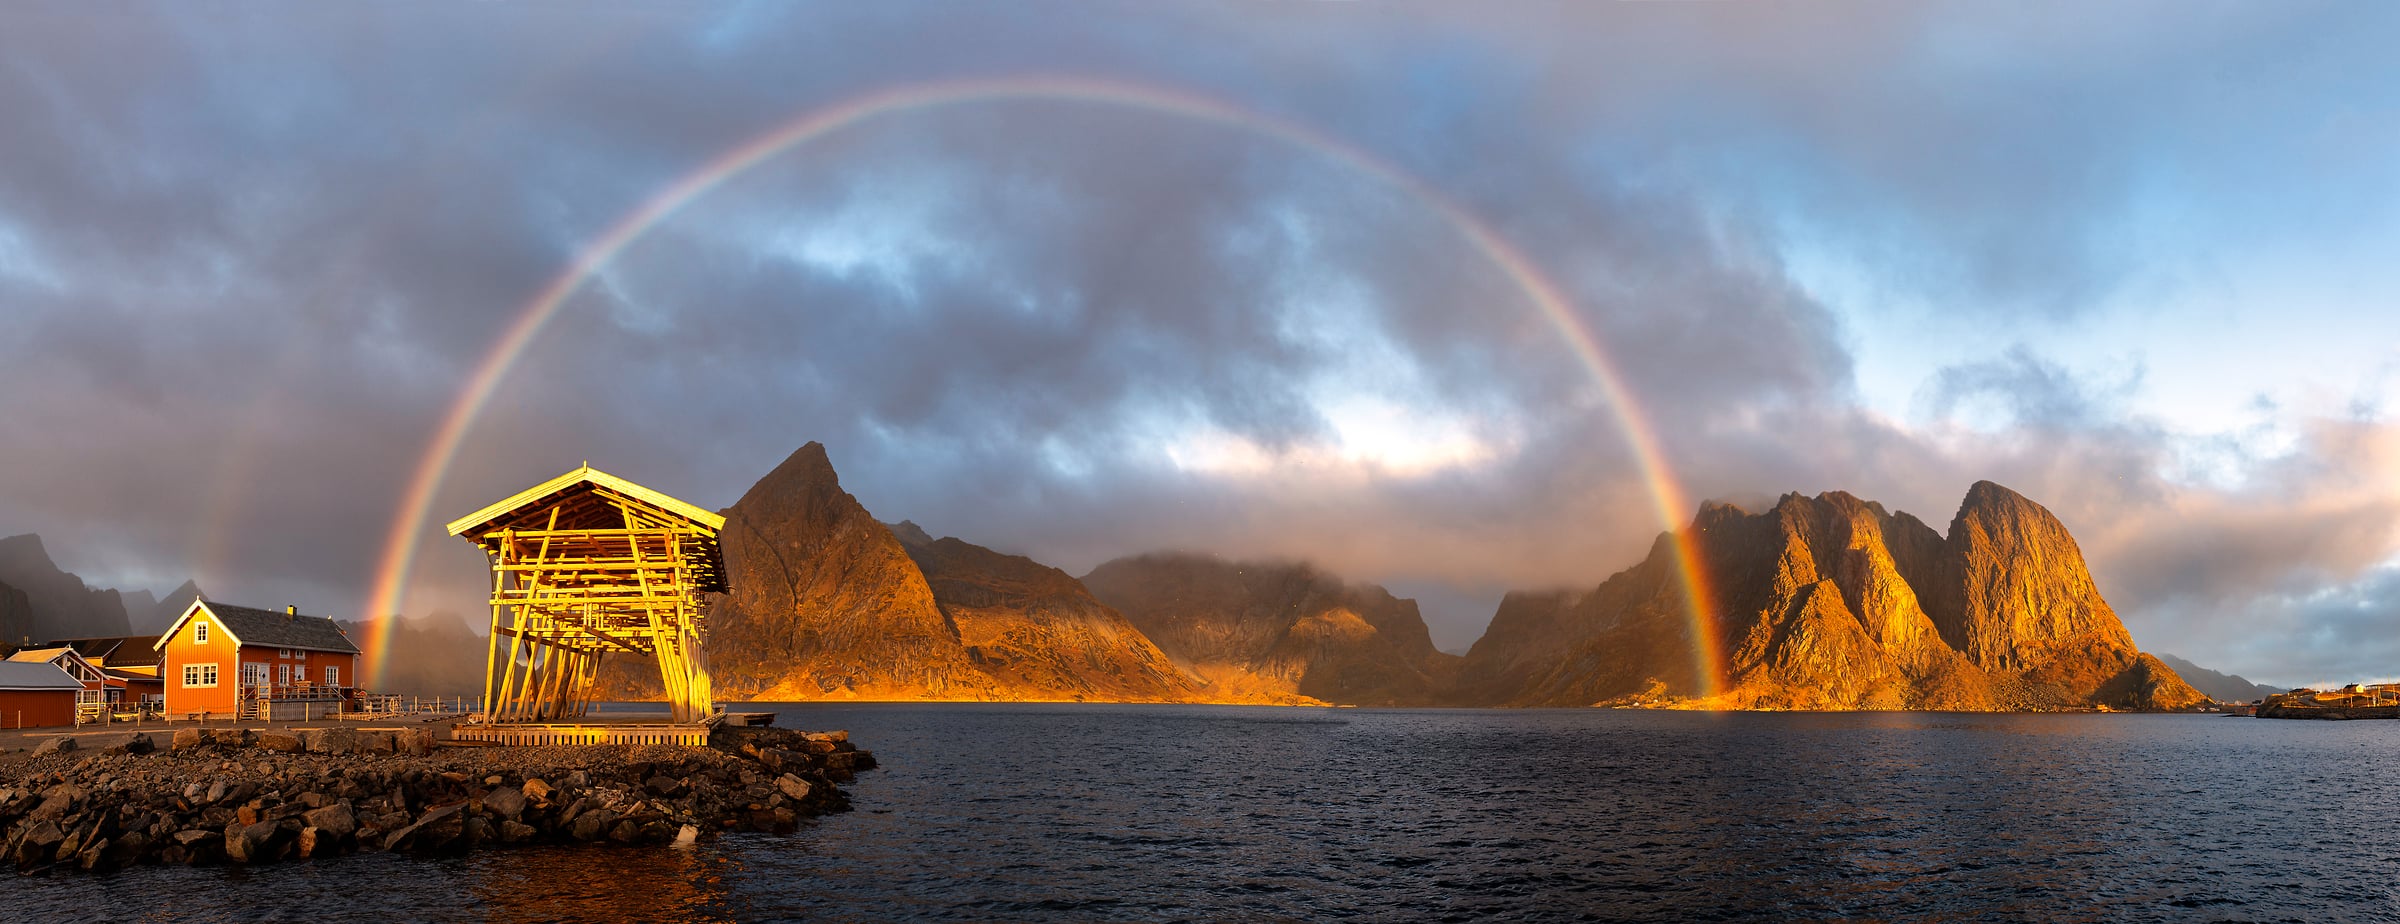 219 megapixels! A very high resolution, large-format VAST photo print of a rainbow over the water and mountains; photograph created by Roberto Moiola in Reine, Lofoten, Norway.